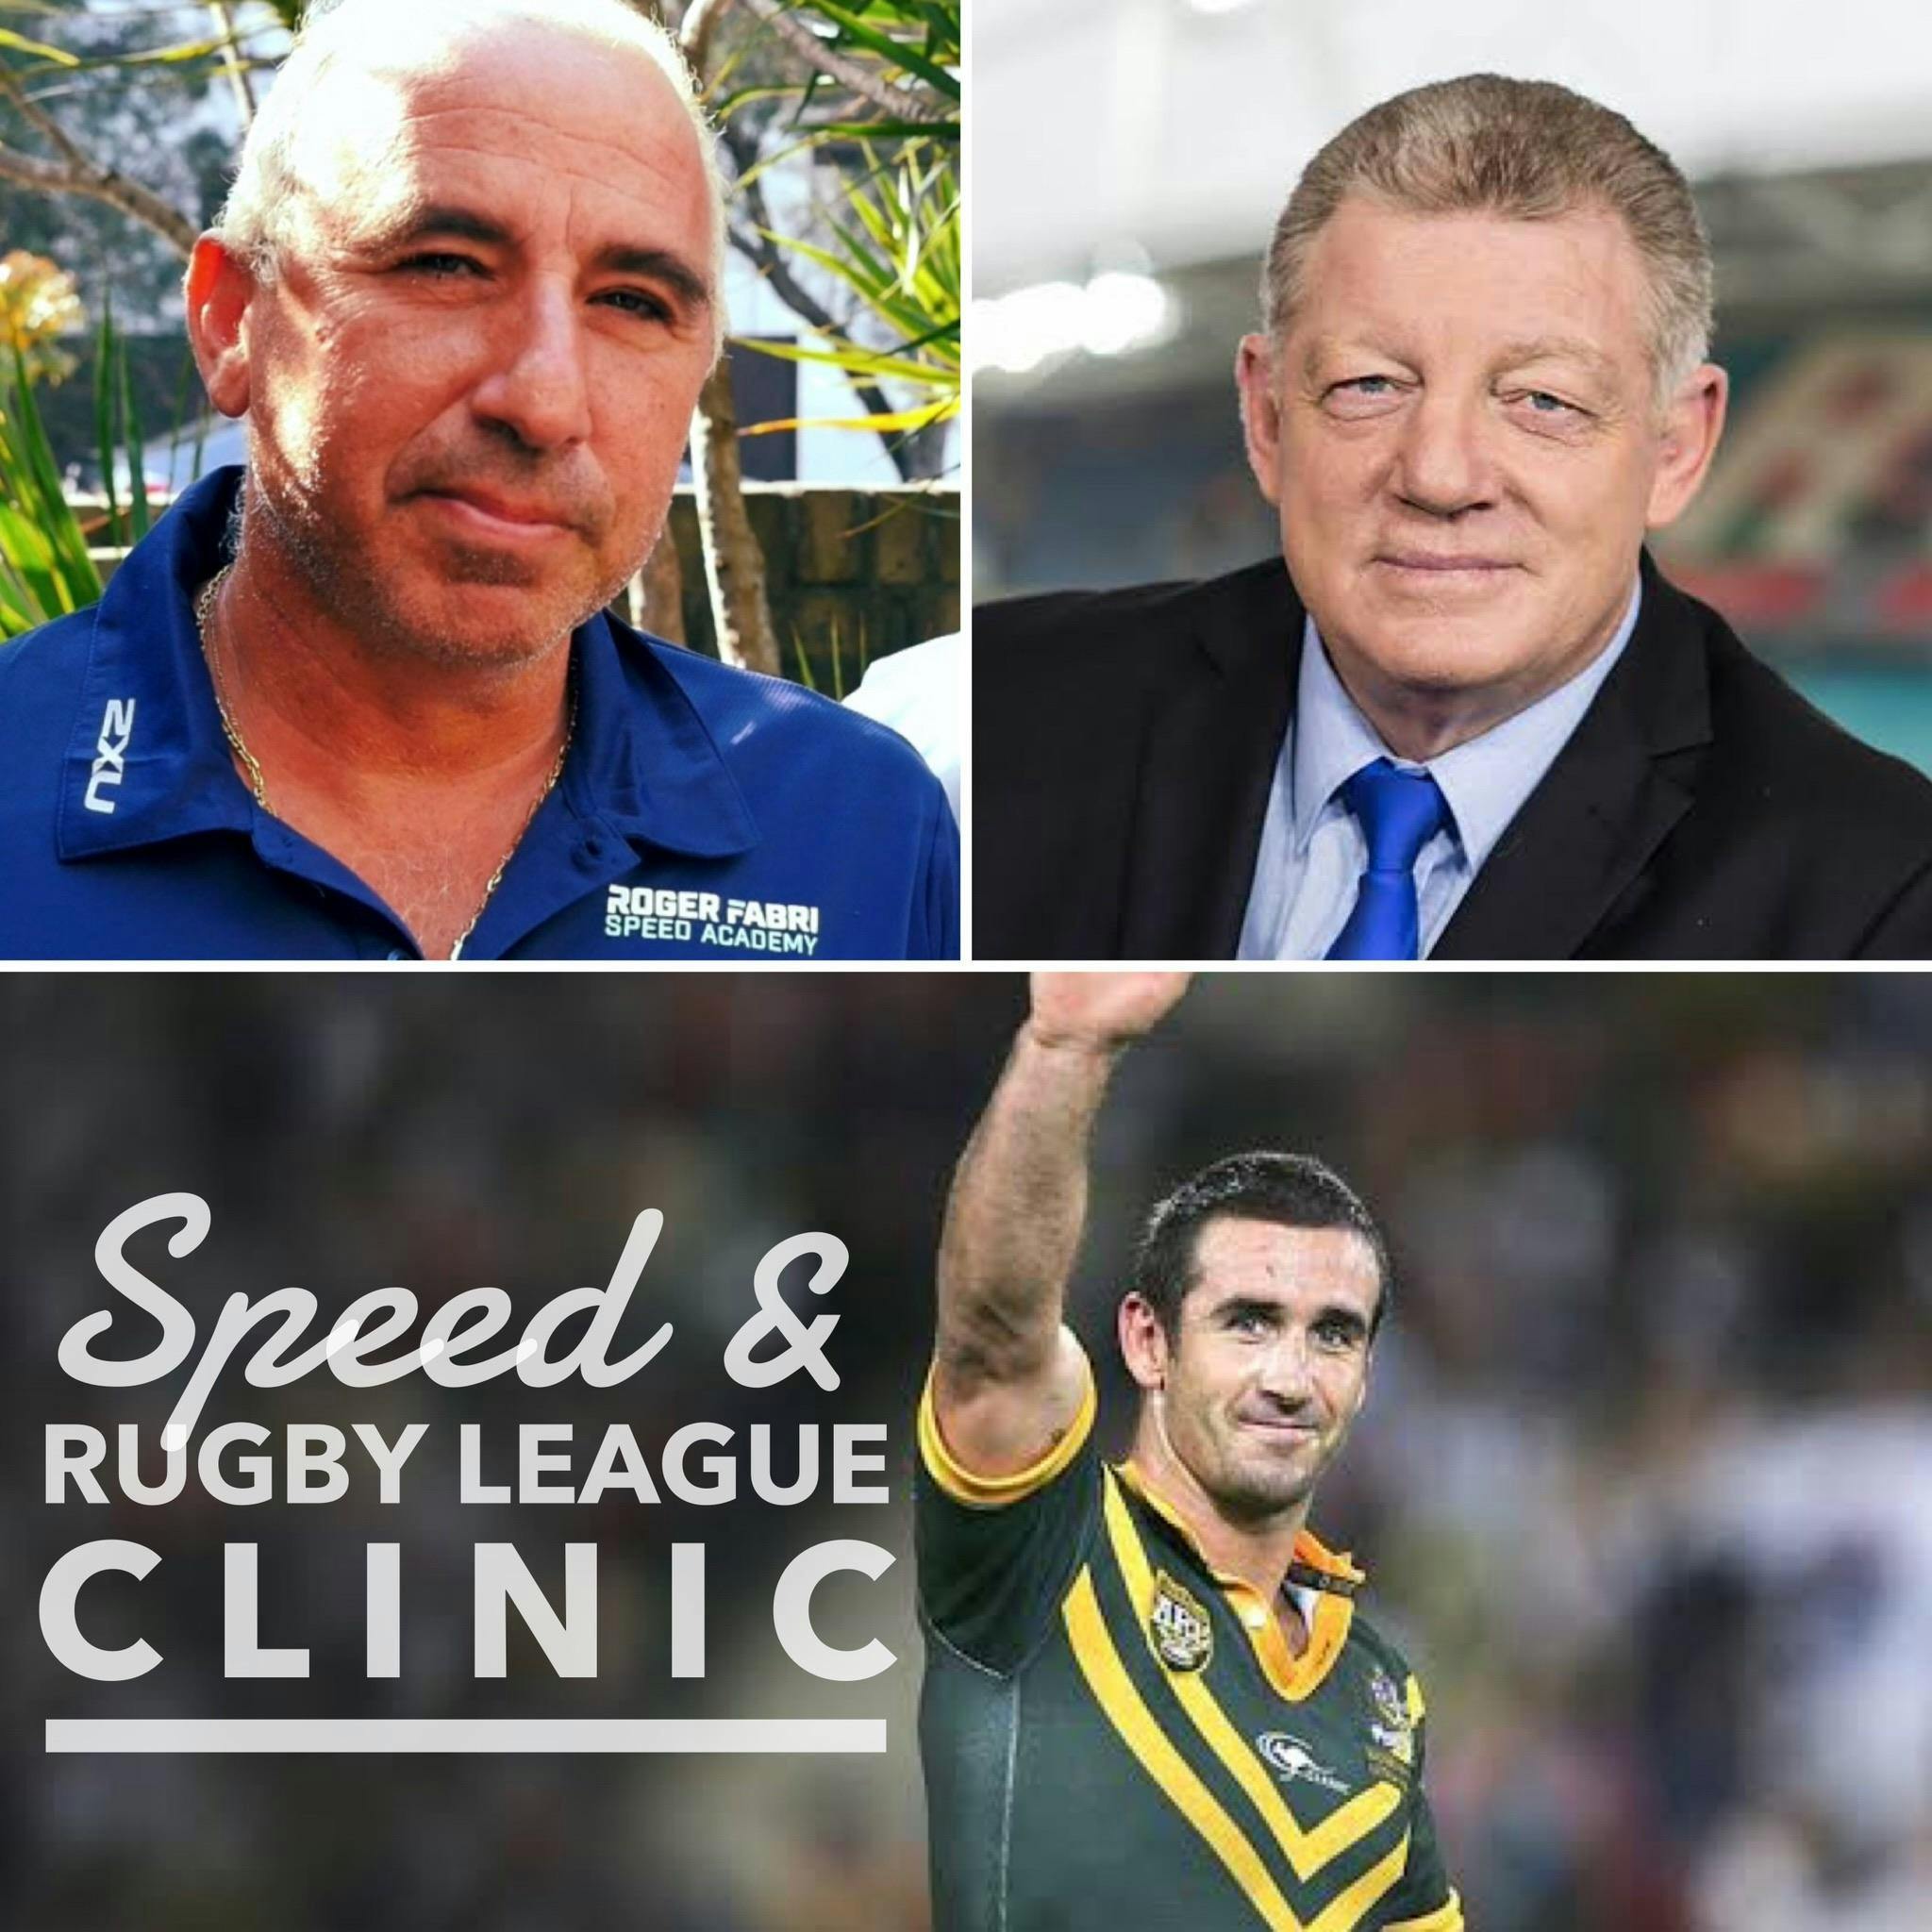 Speed & Rugby League Clinic - Roger Fabri, Gus Gould, Joey Johns